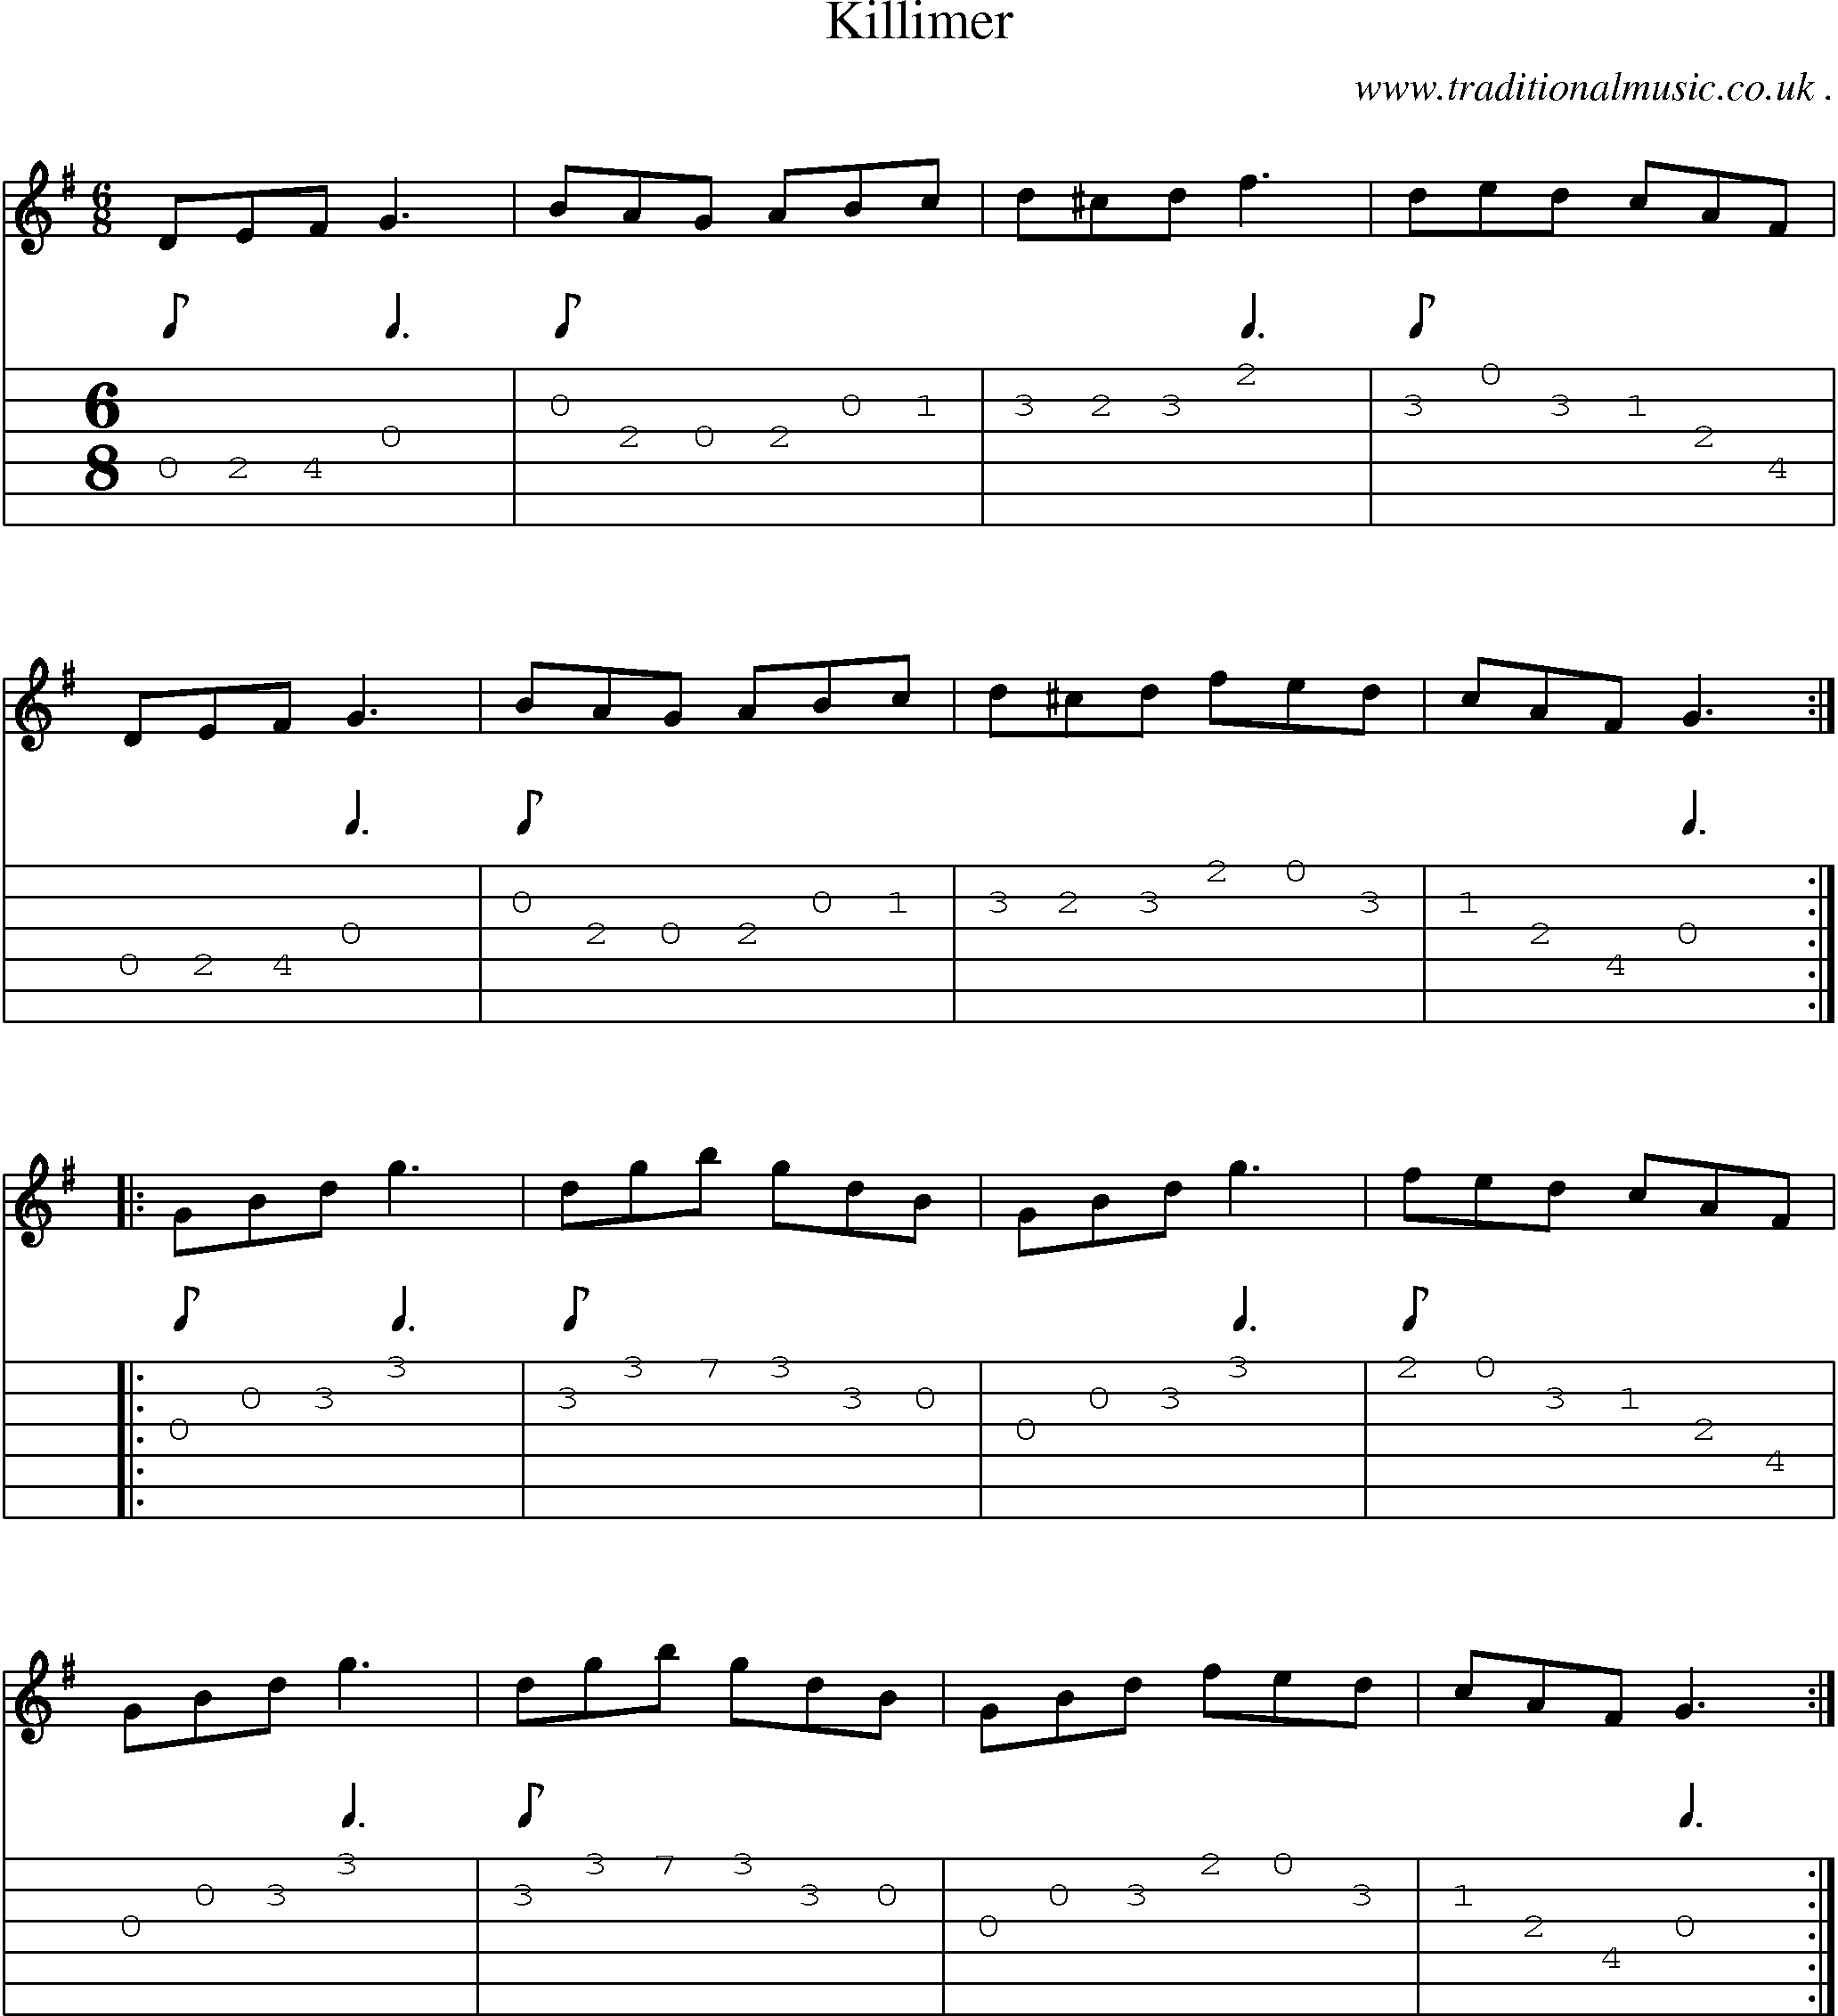 Sheet-Music and Guitar Tabs for Killimer